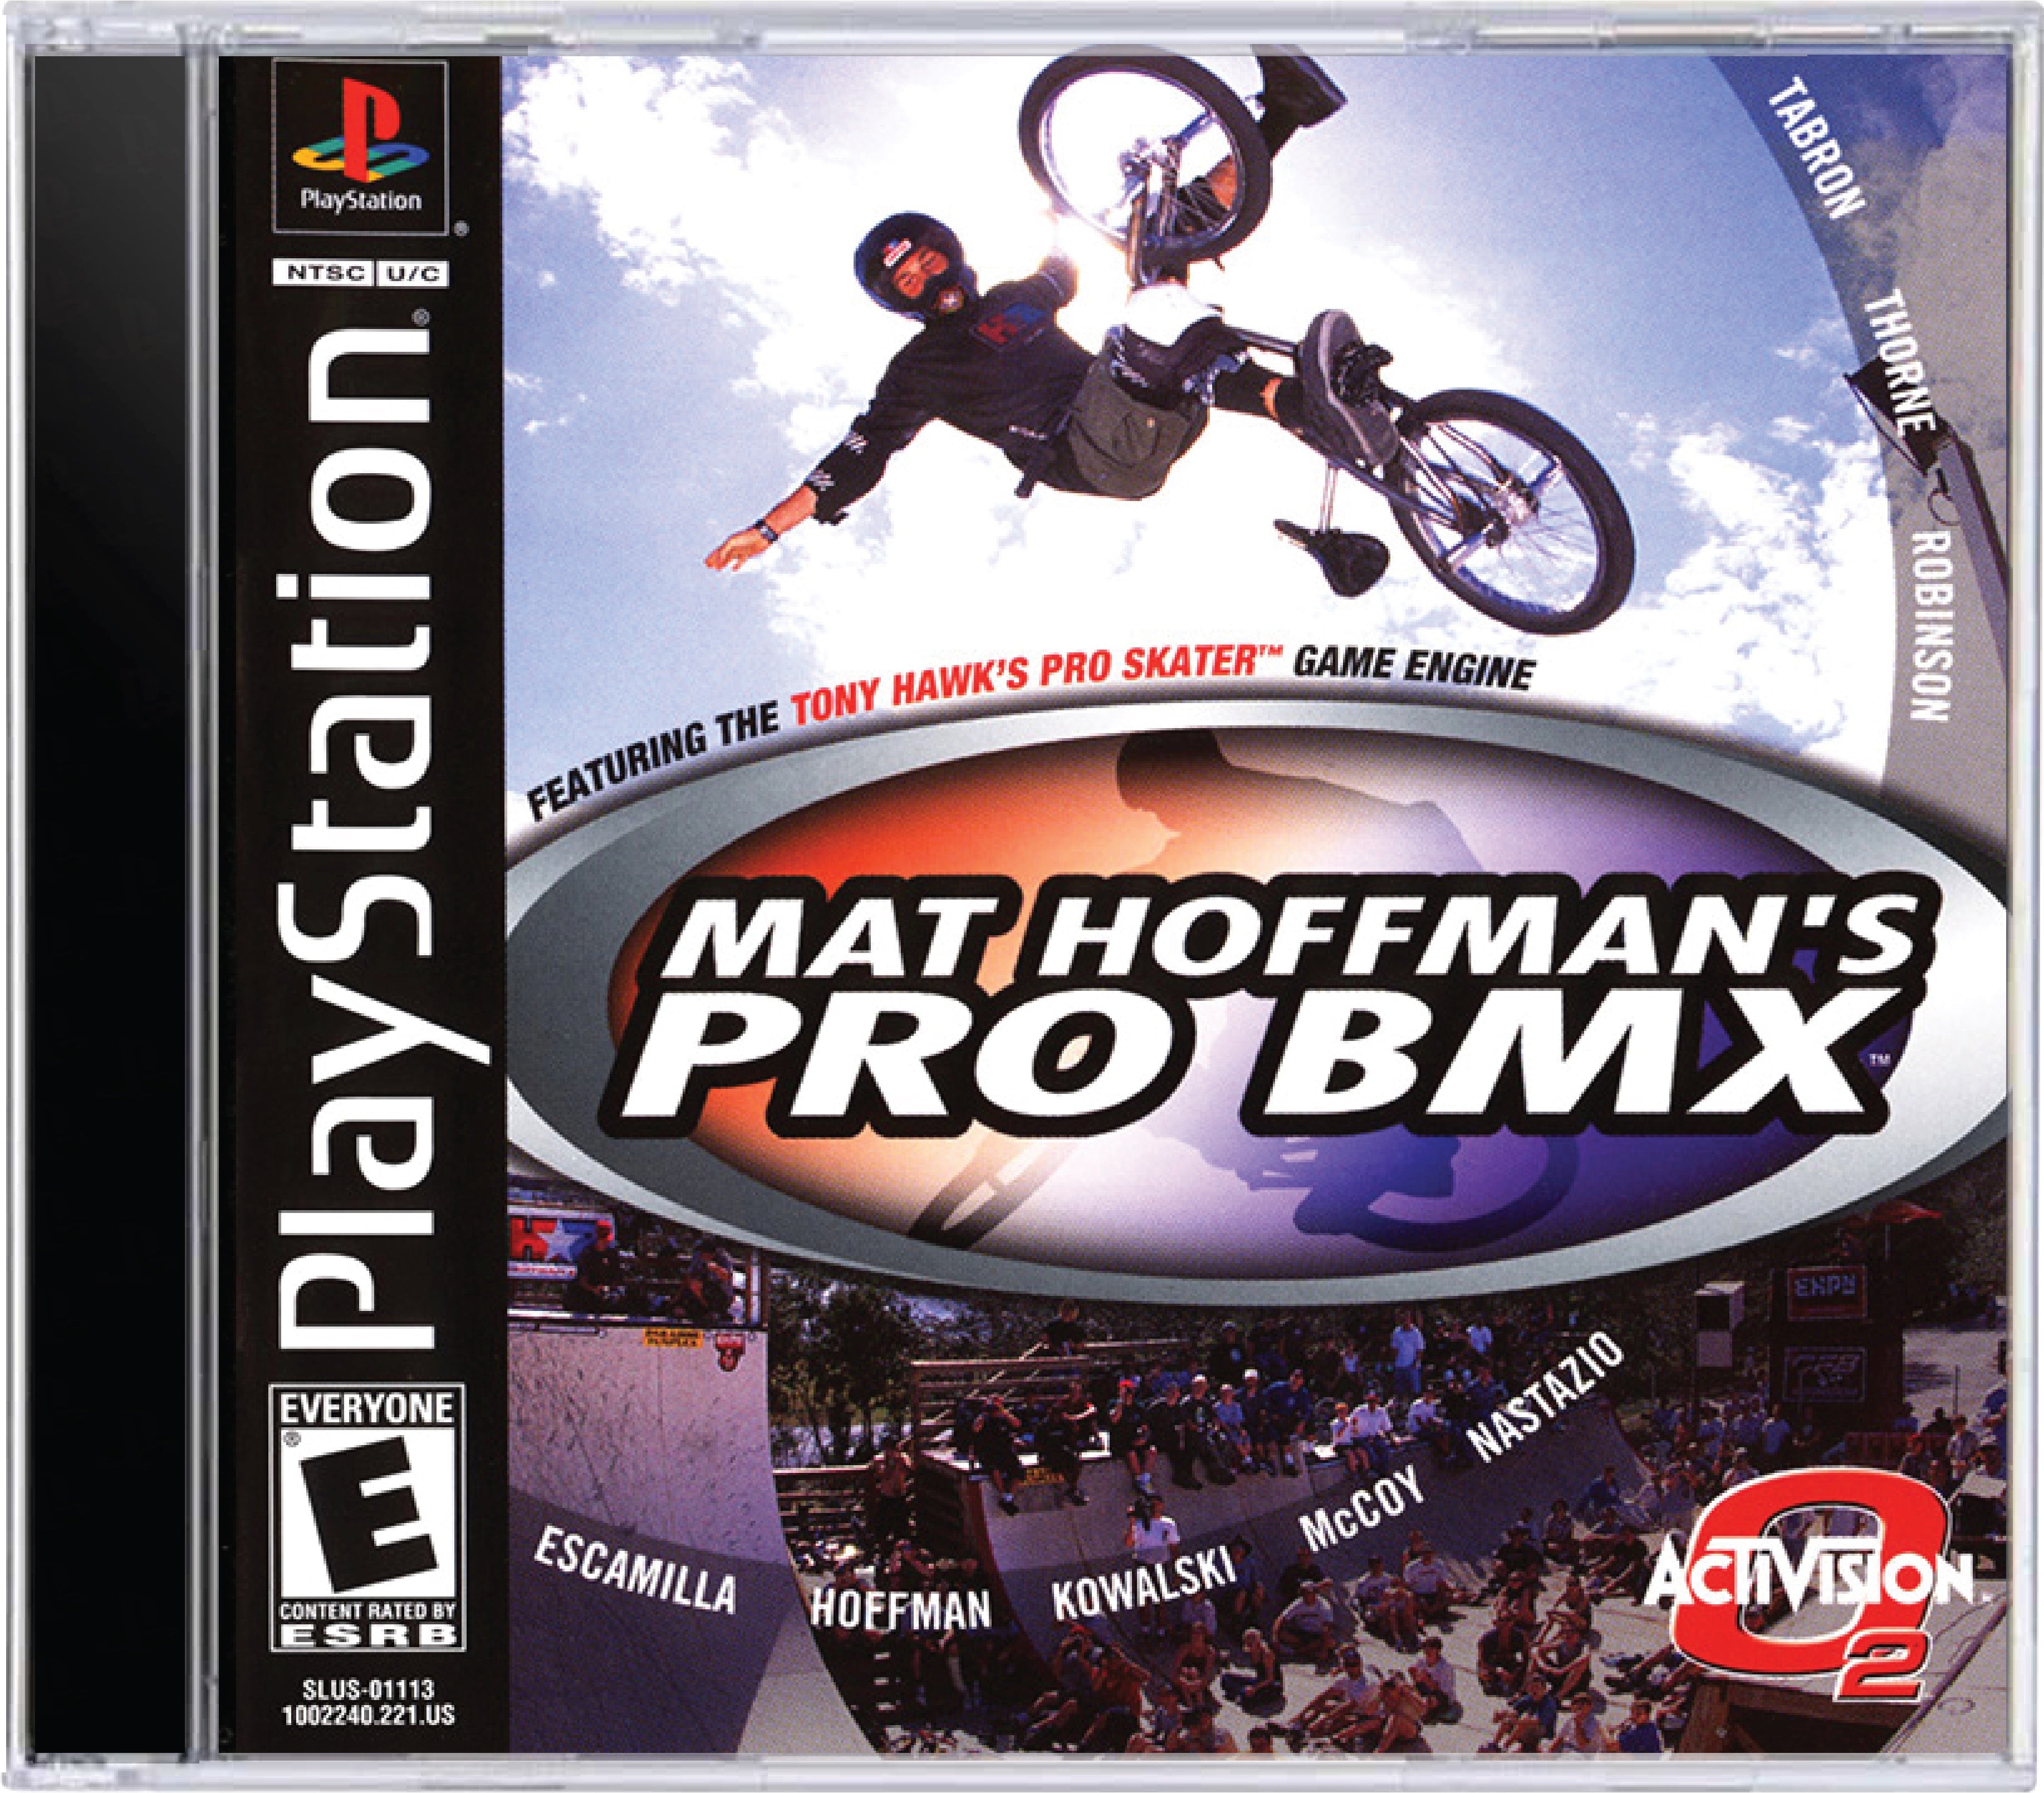 Mat Hoffman's Pro BMX Cover Art and Product Photo